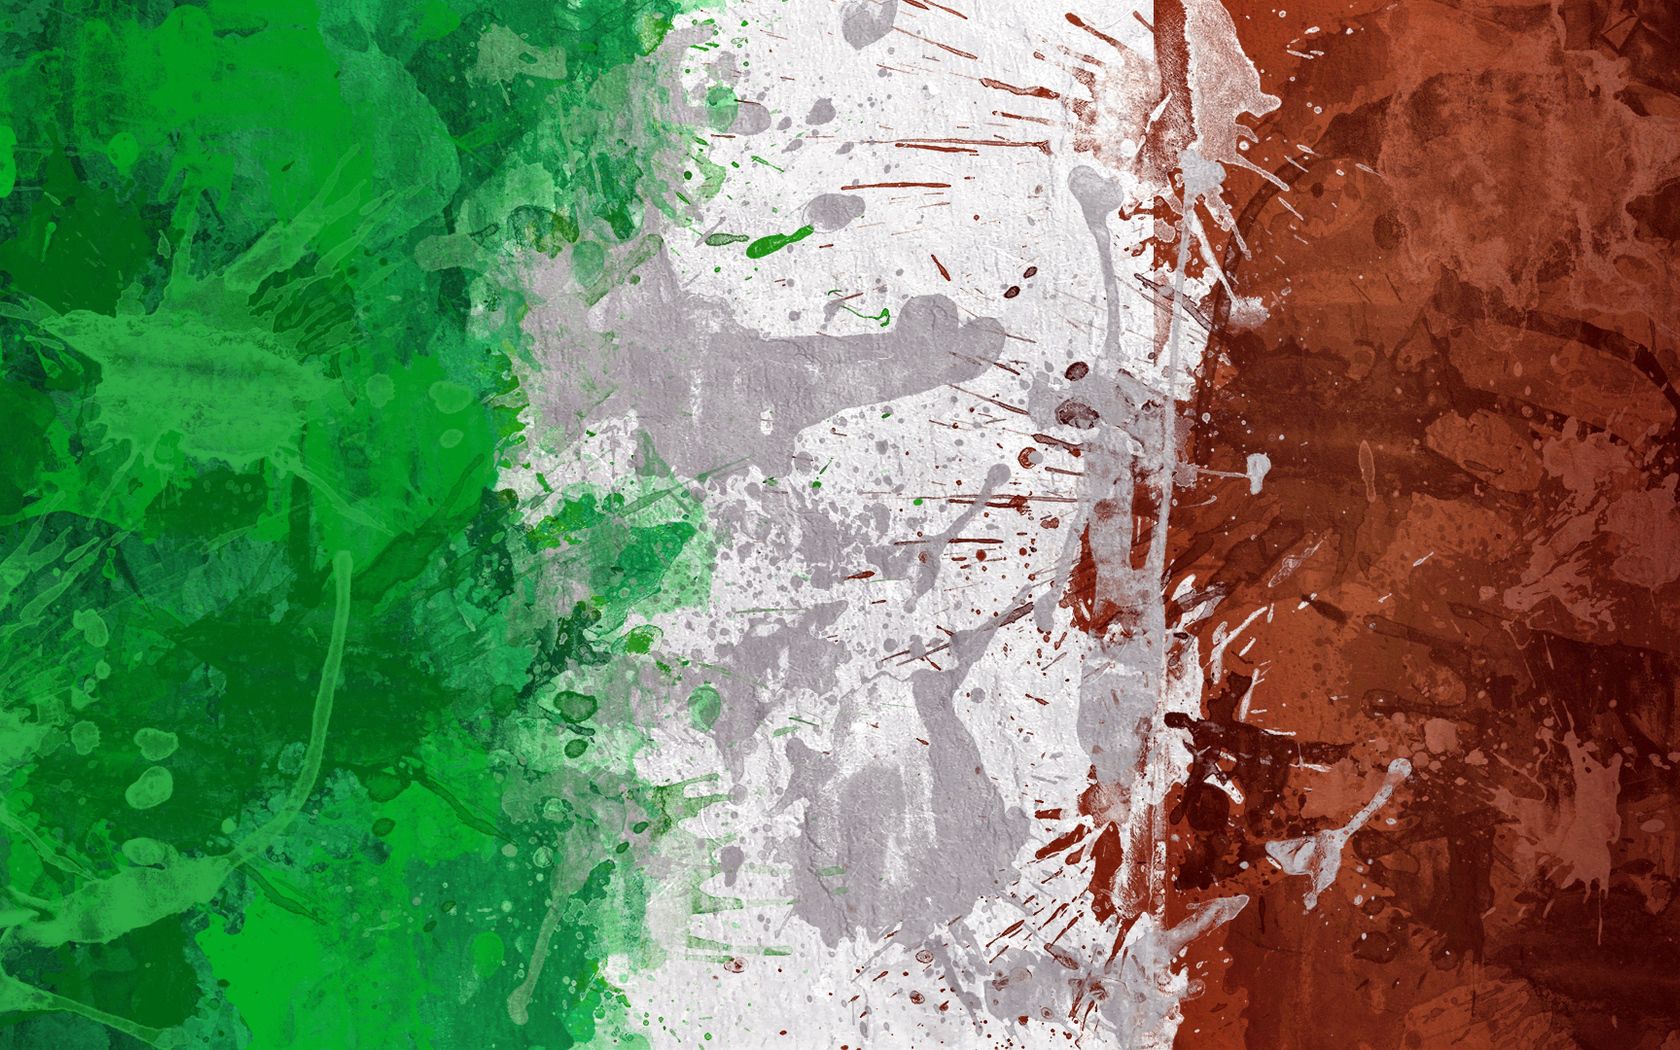 italy, background, texture, textures, stains, spots, flag cellphone